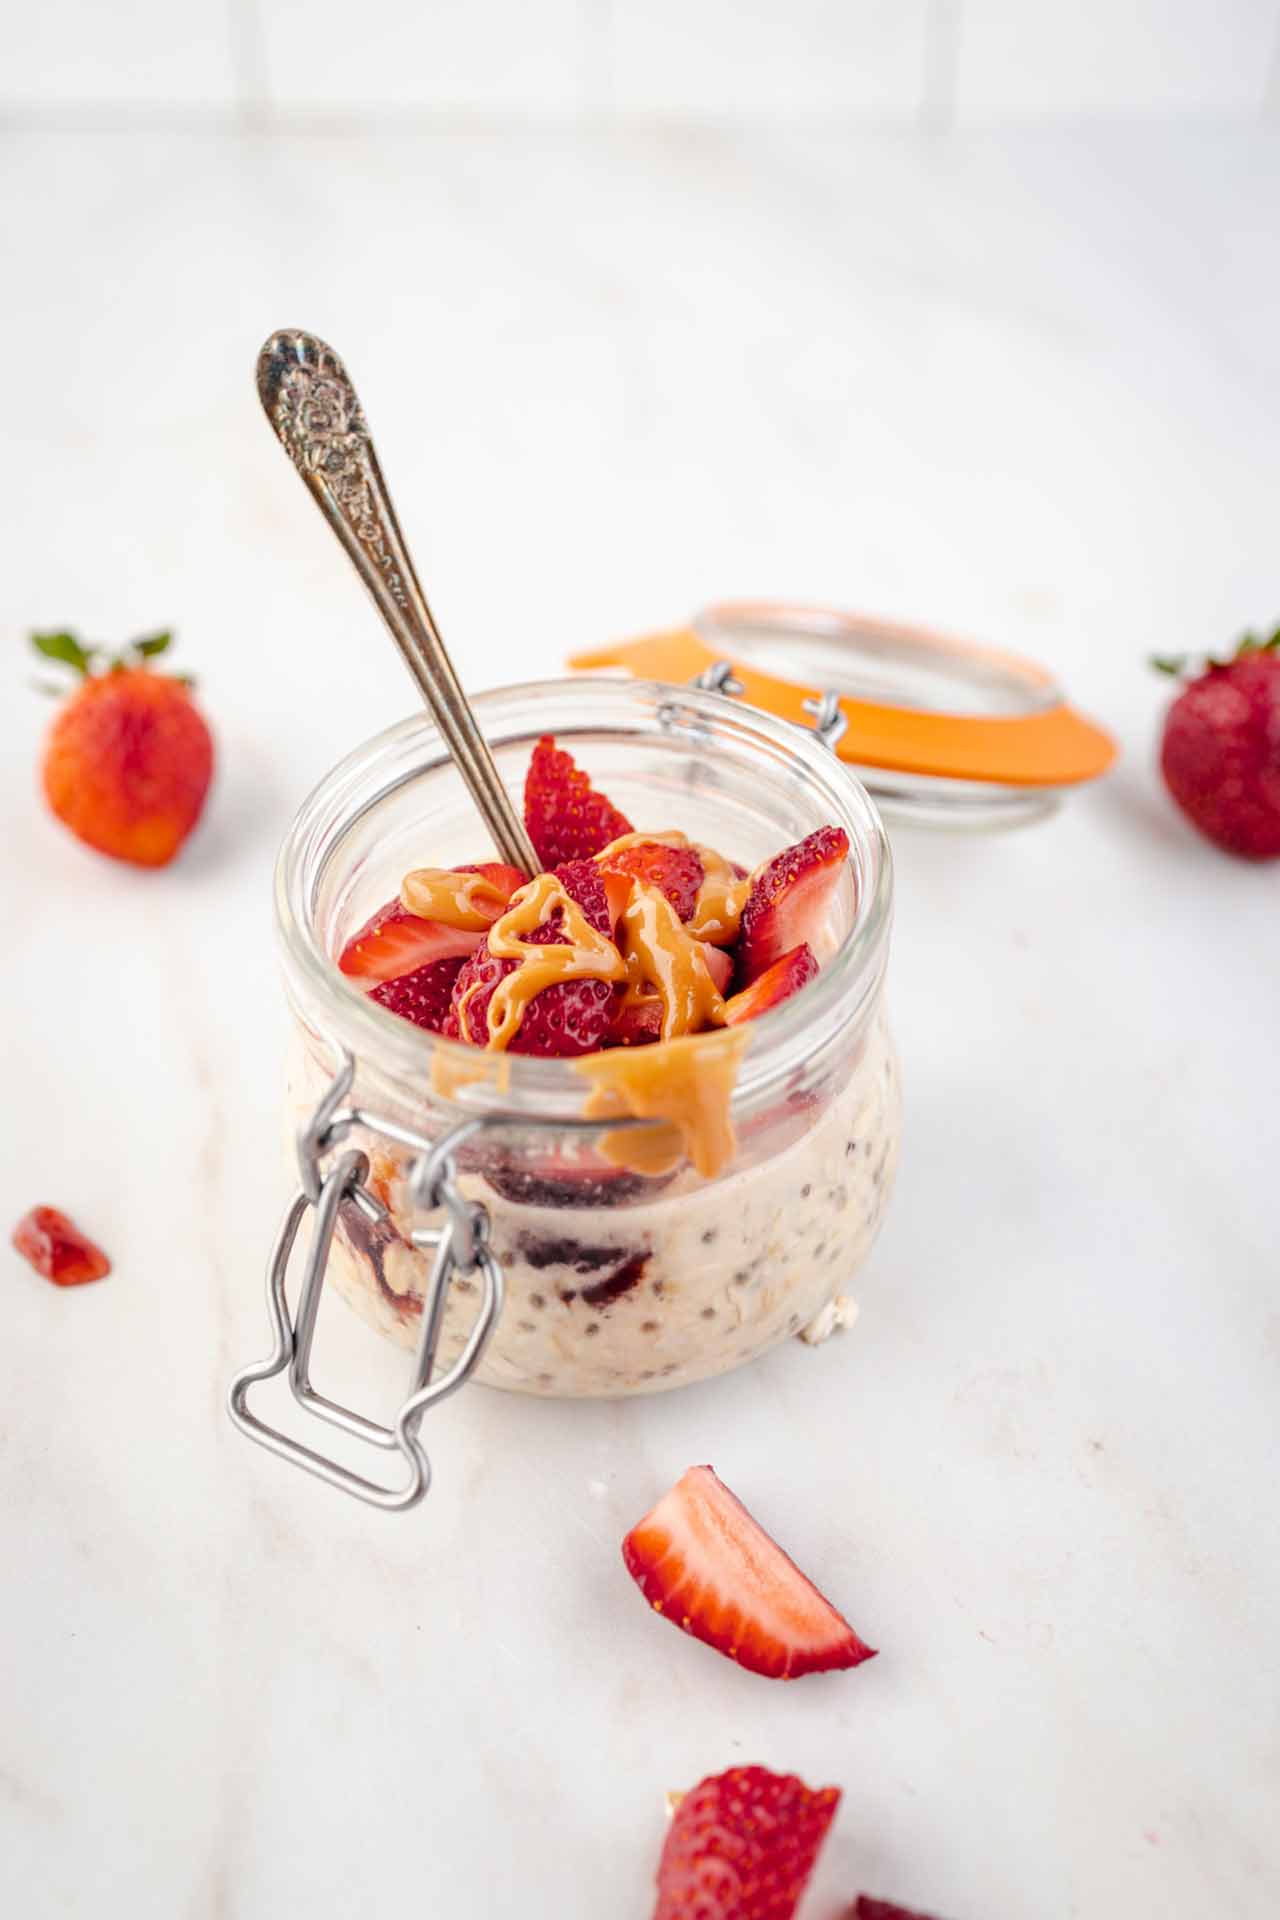 Peanut Butter and Jelly Overnight Oats Recipe